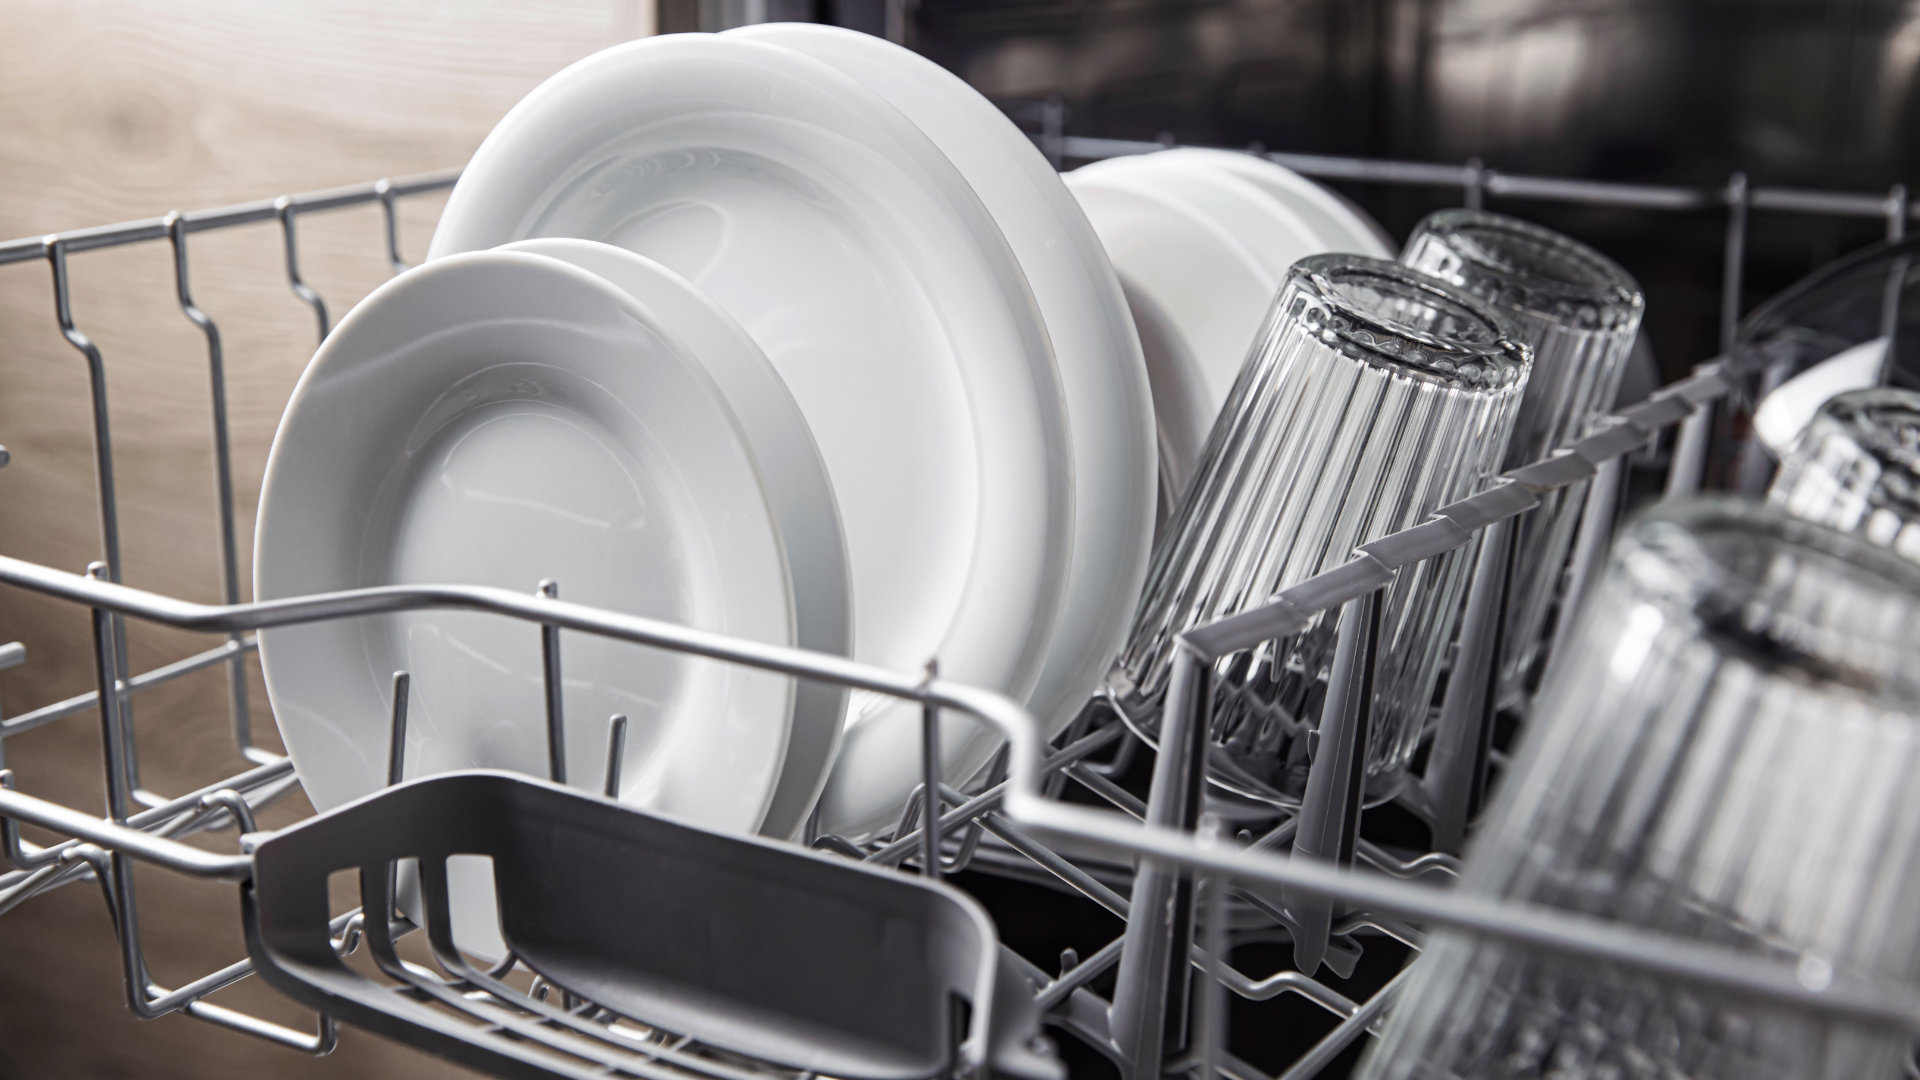 Featured image for “Why Is The Dishwasher Not Drying The Dishes Properly?”